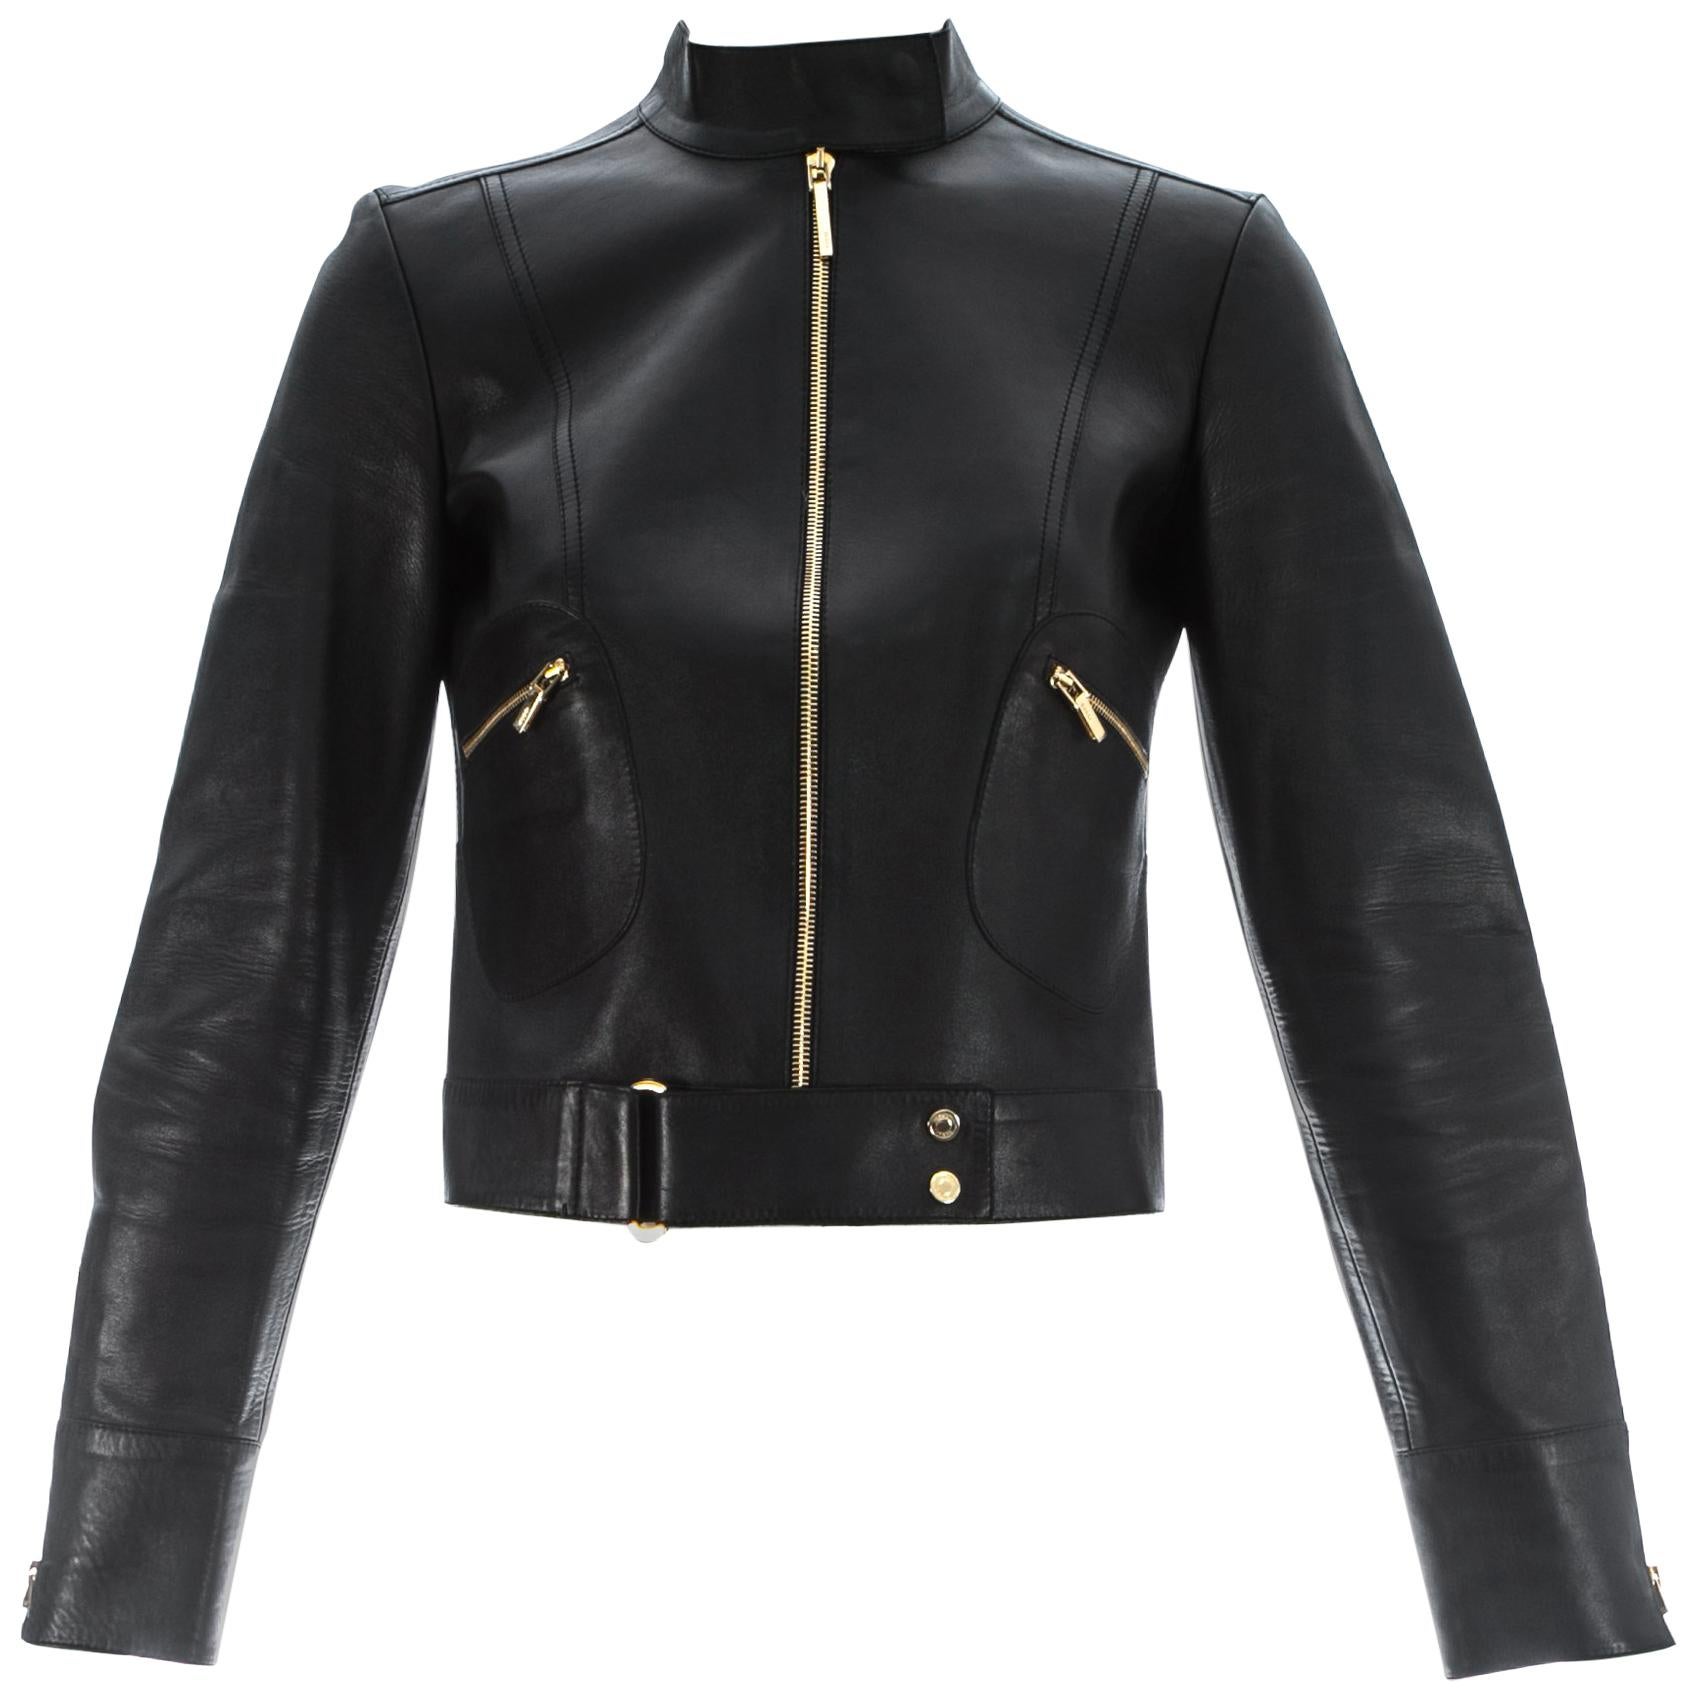 Tom Ford for Gucci black leather fitted jacket with gold hardware, S/S 1999